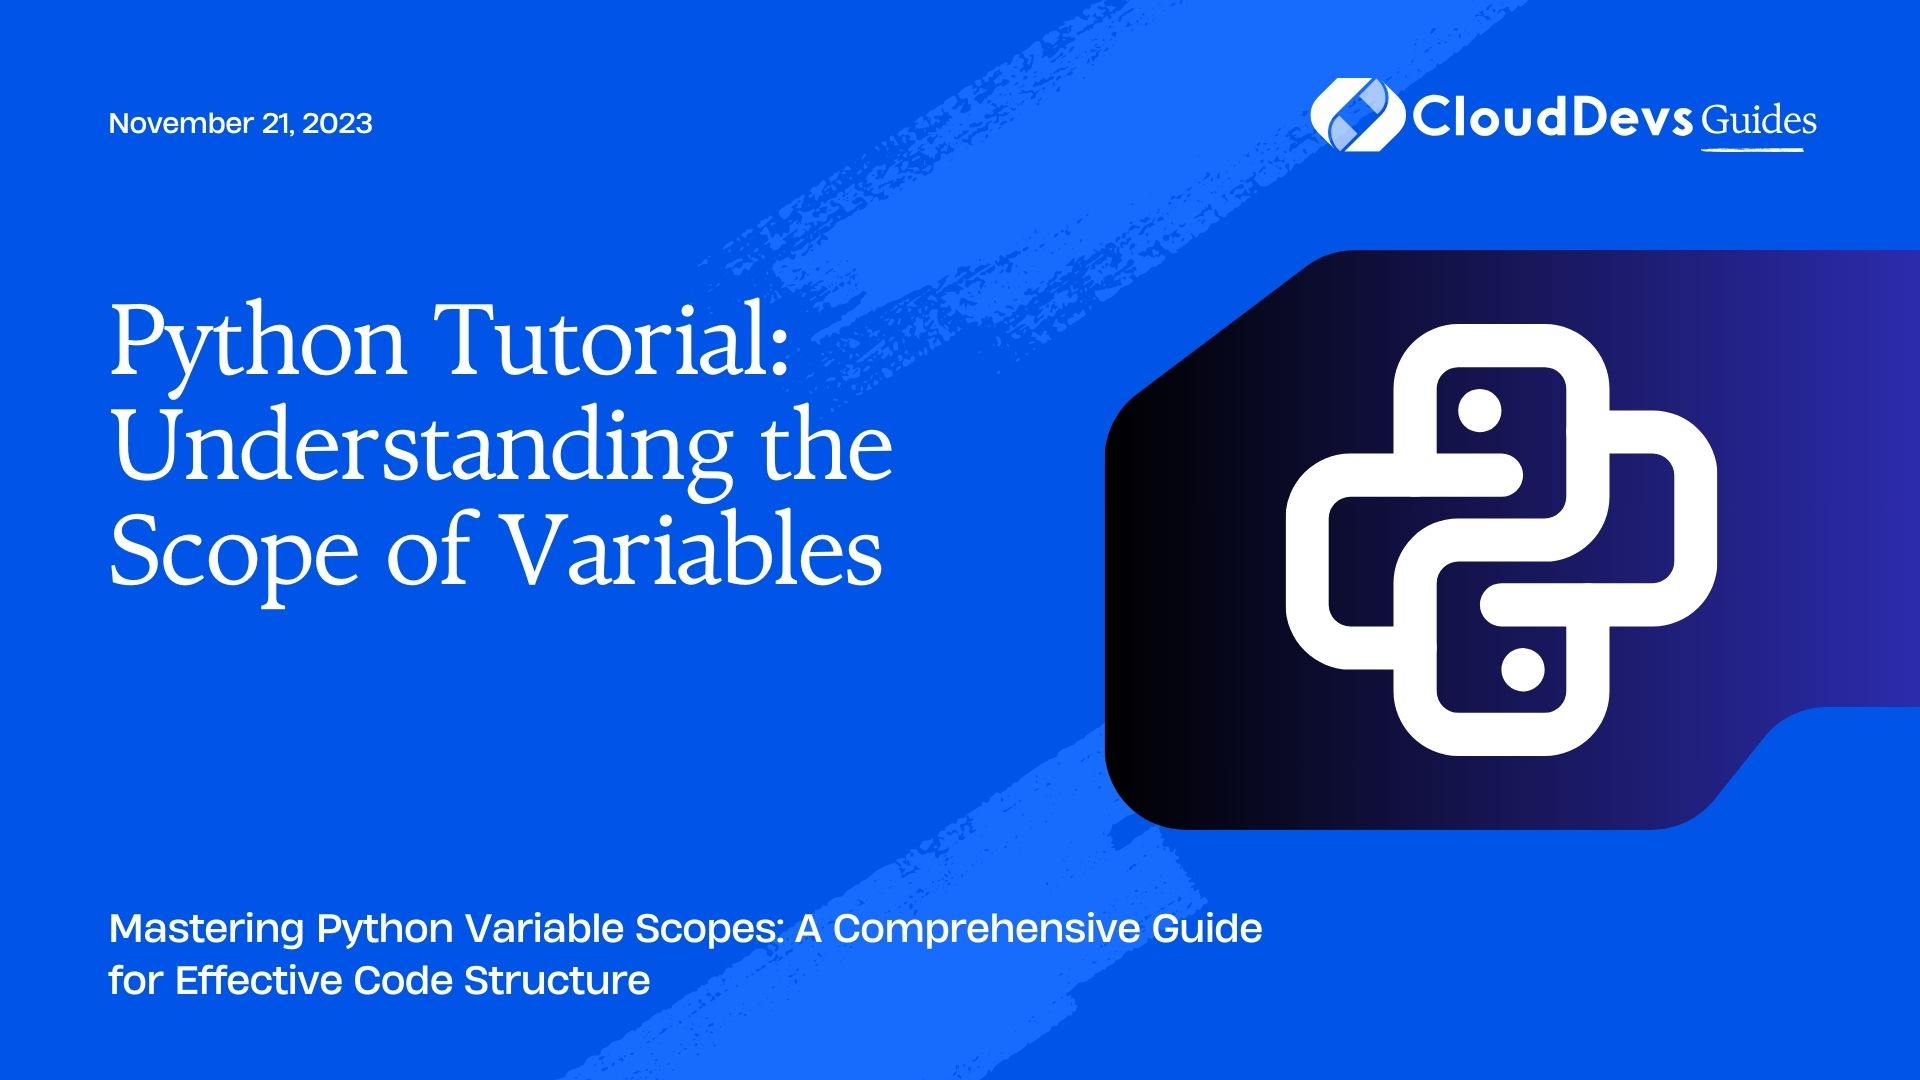 Python Tutorial: Understanding the Scope of Variables